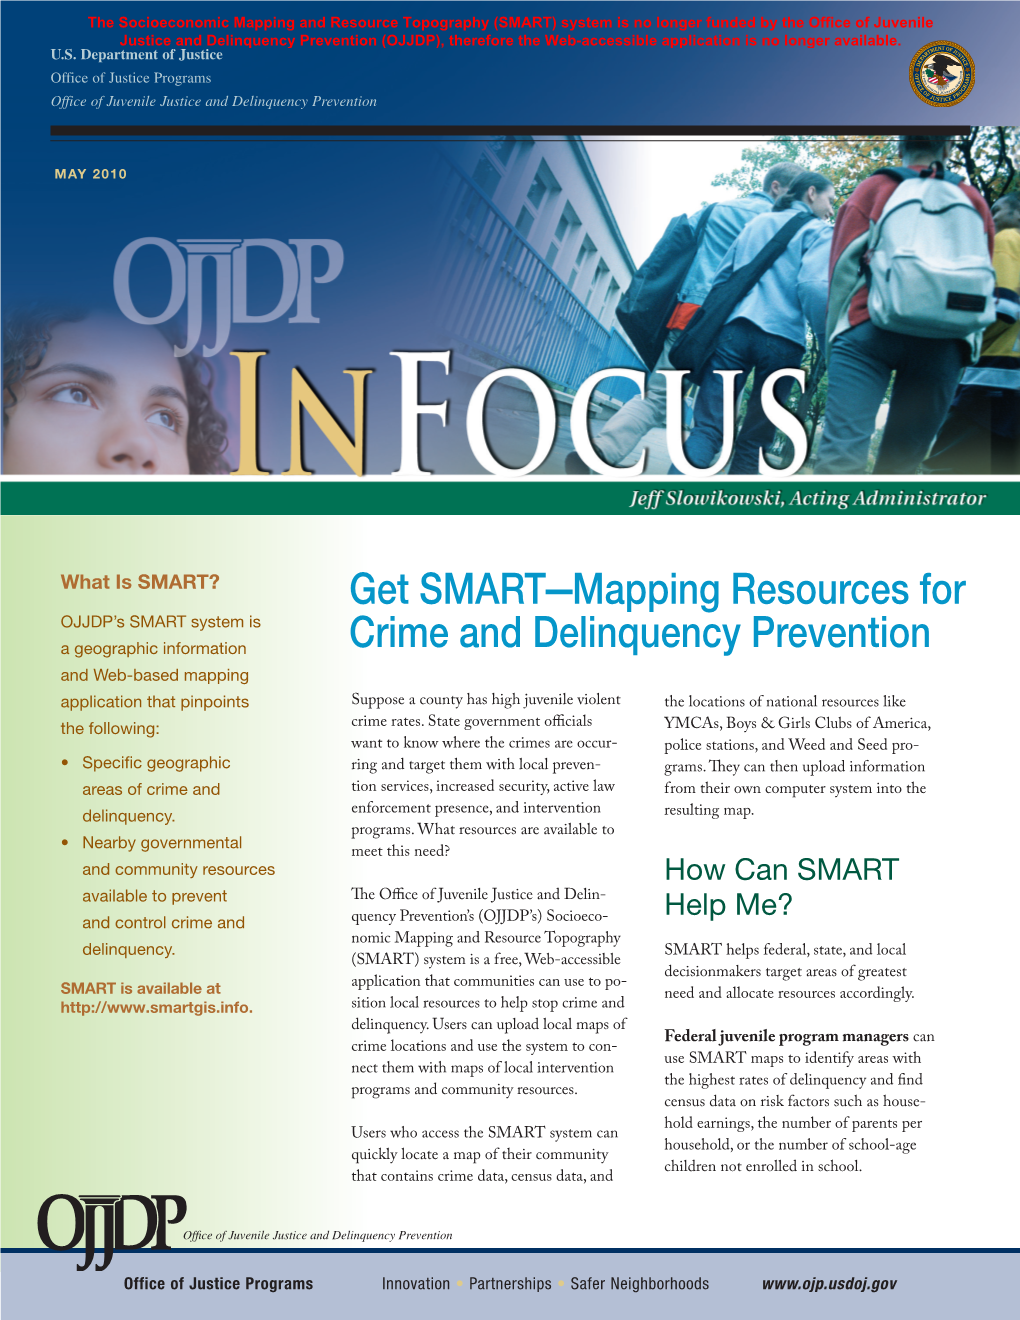 Get SMART---Mapping Resources for Crime and Delinquency Prevention